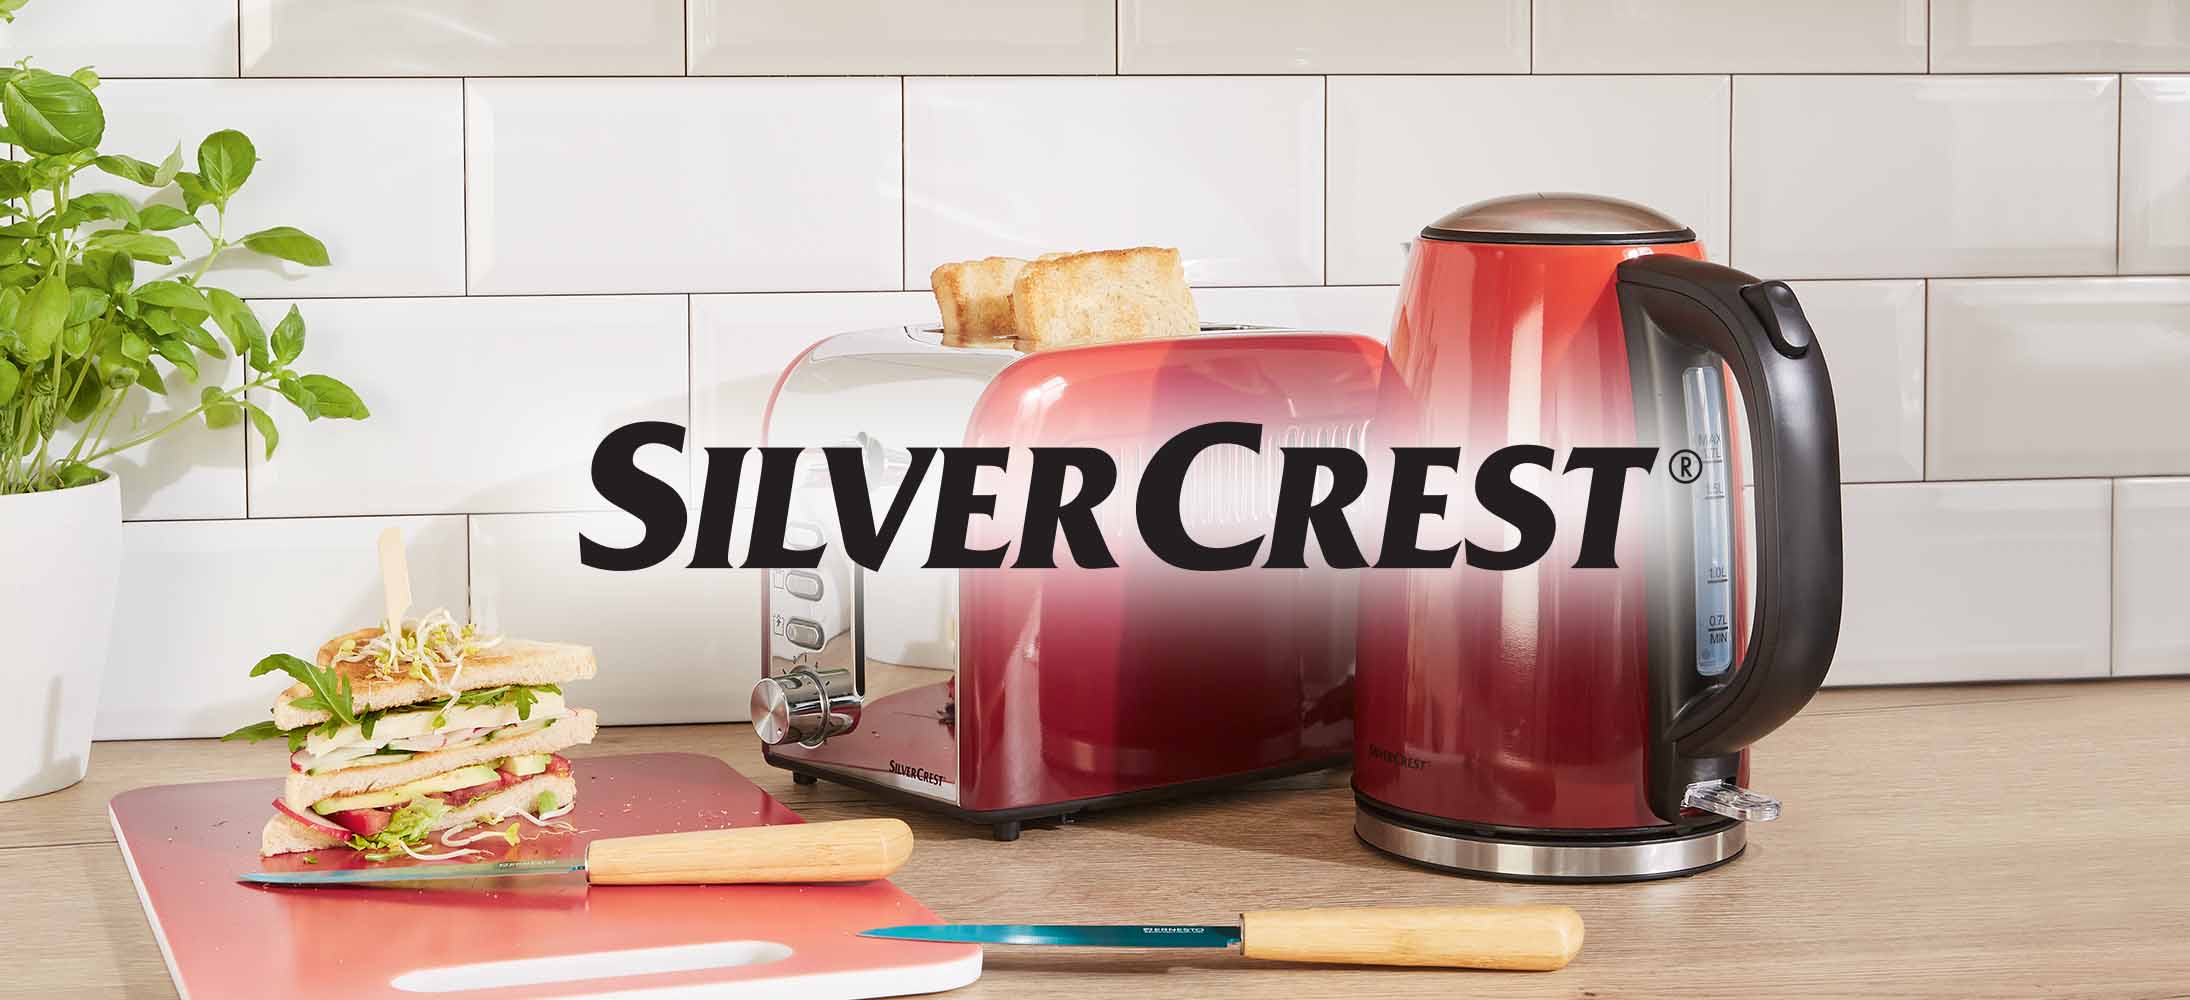 Middle of Lidl - SilverCrest Electric Grater - For the grater good! 